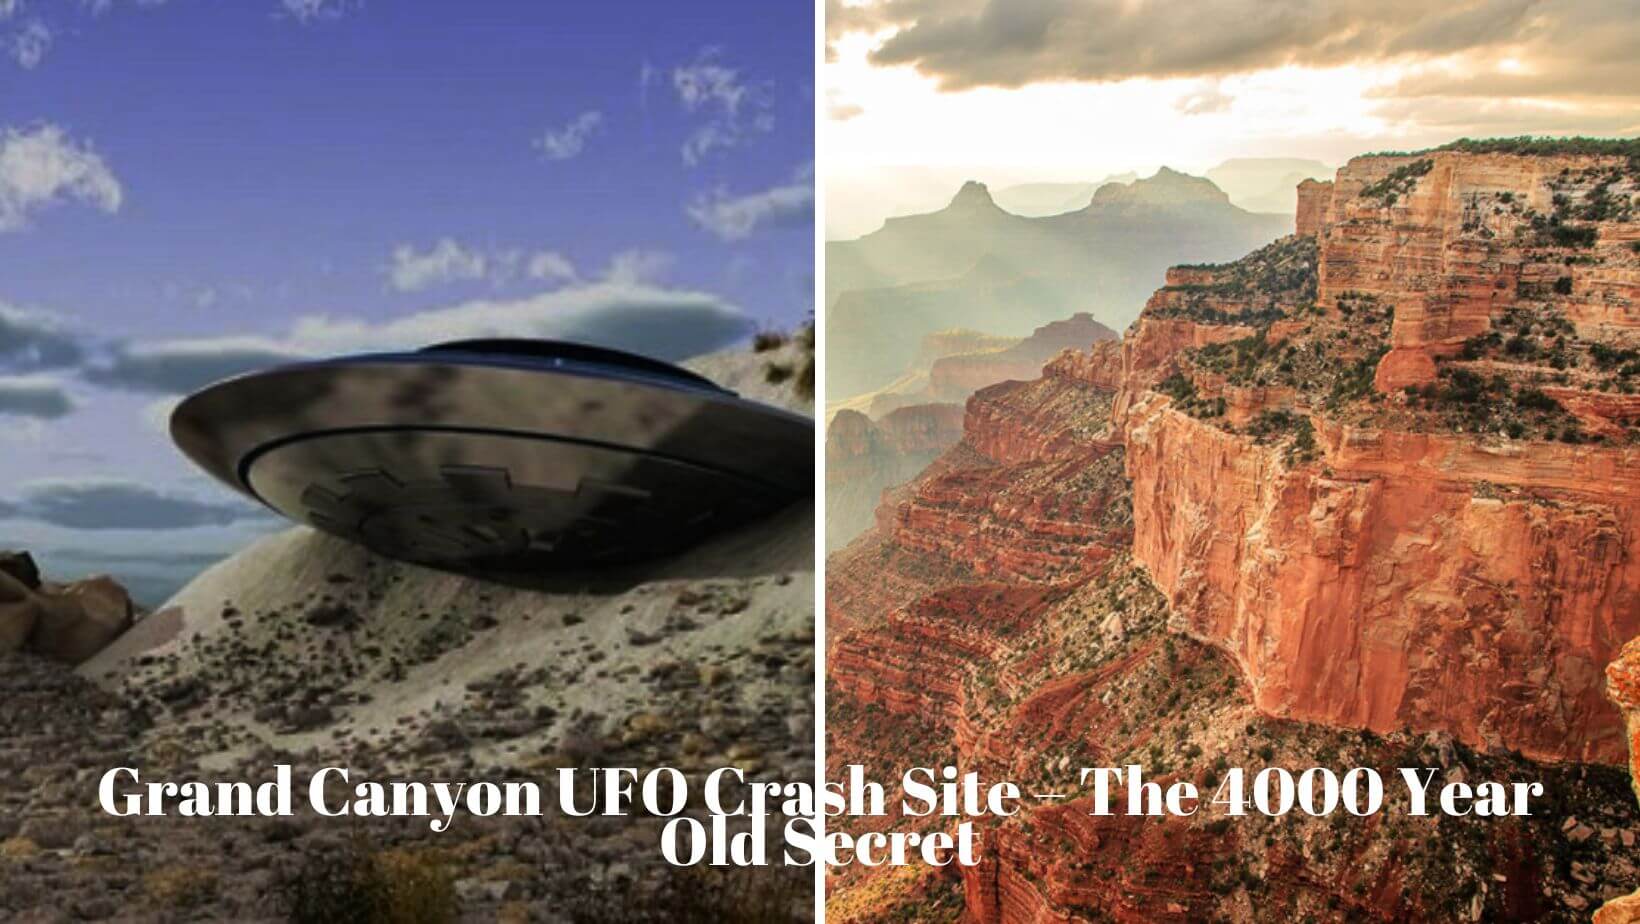 Grand Canyon UFO Crash Site – The 4000 Year Old Secret